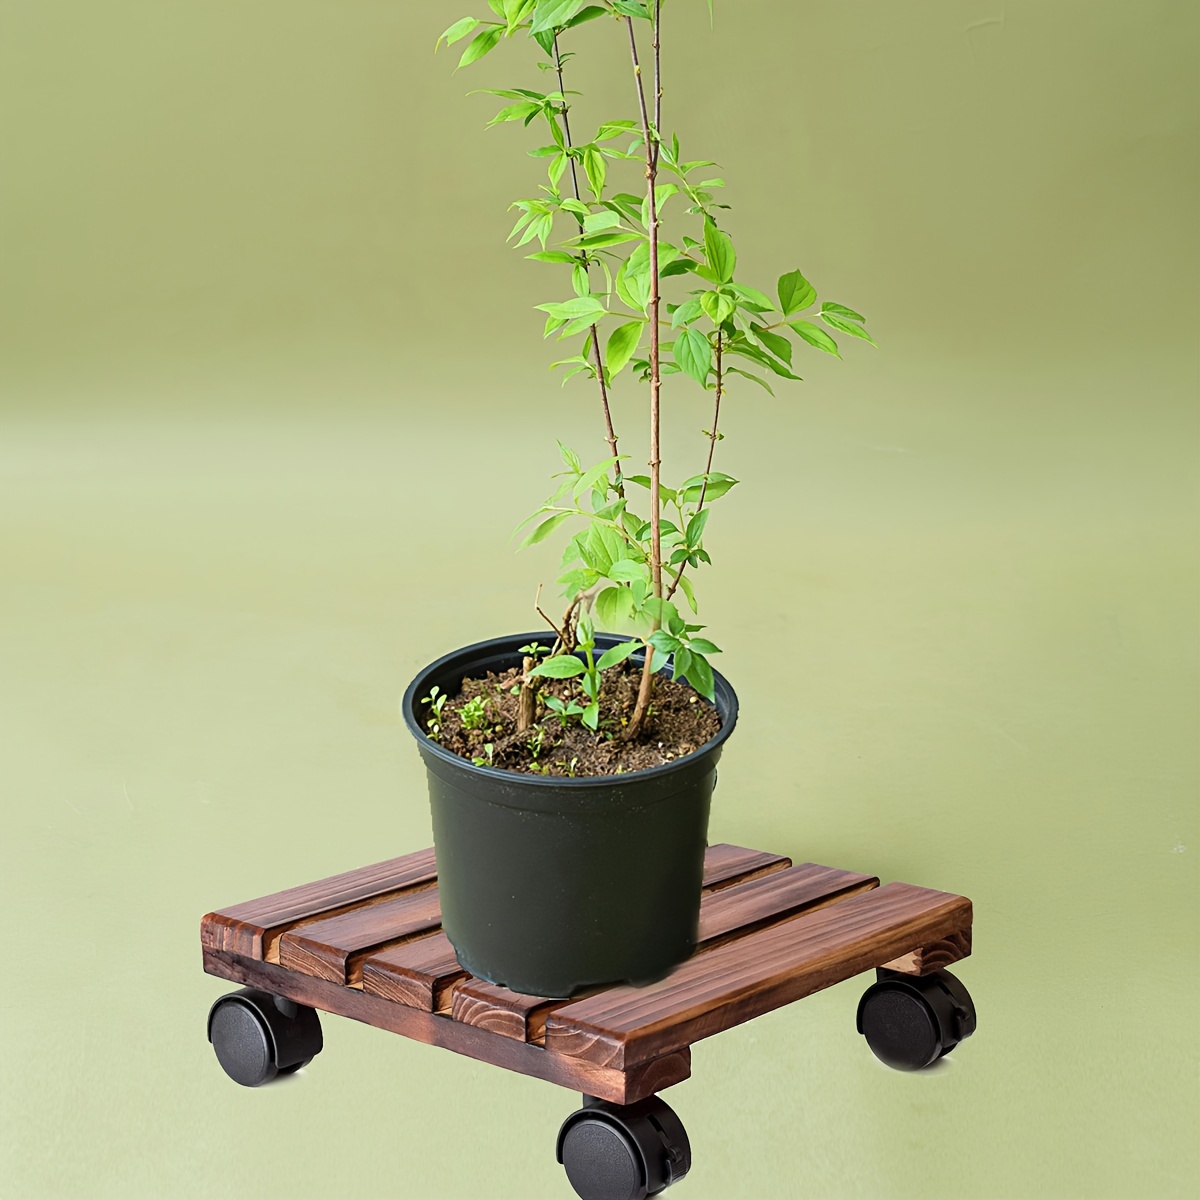 

1pc Plant Flowerpot Base With Wheels - This Is A 12-inch Square Wooden Plant Stand With 4 Heavy-duty Casters, Long Service Life, 360-degree Rotation, And A Maximum Load Capacity Of 150 Pounds